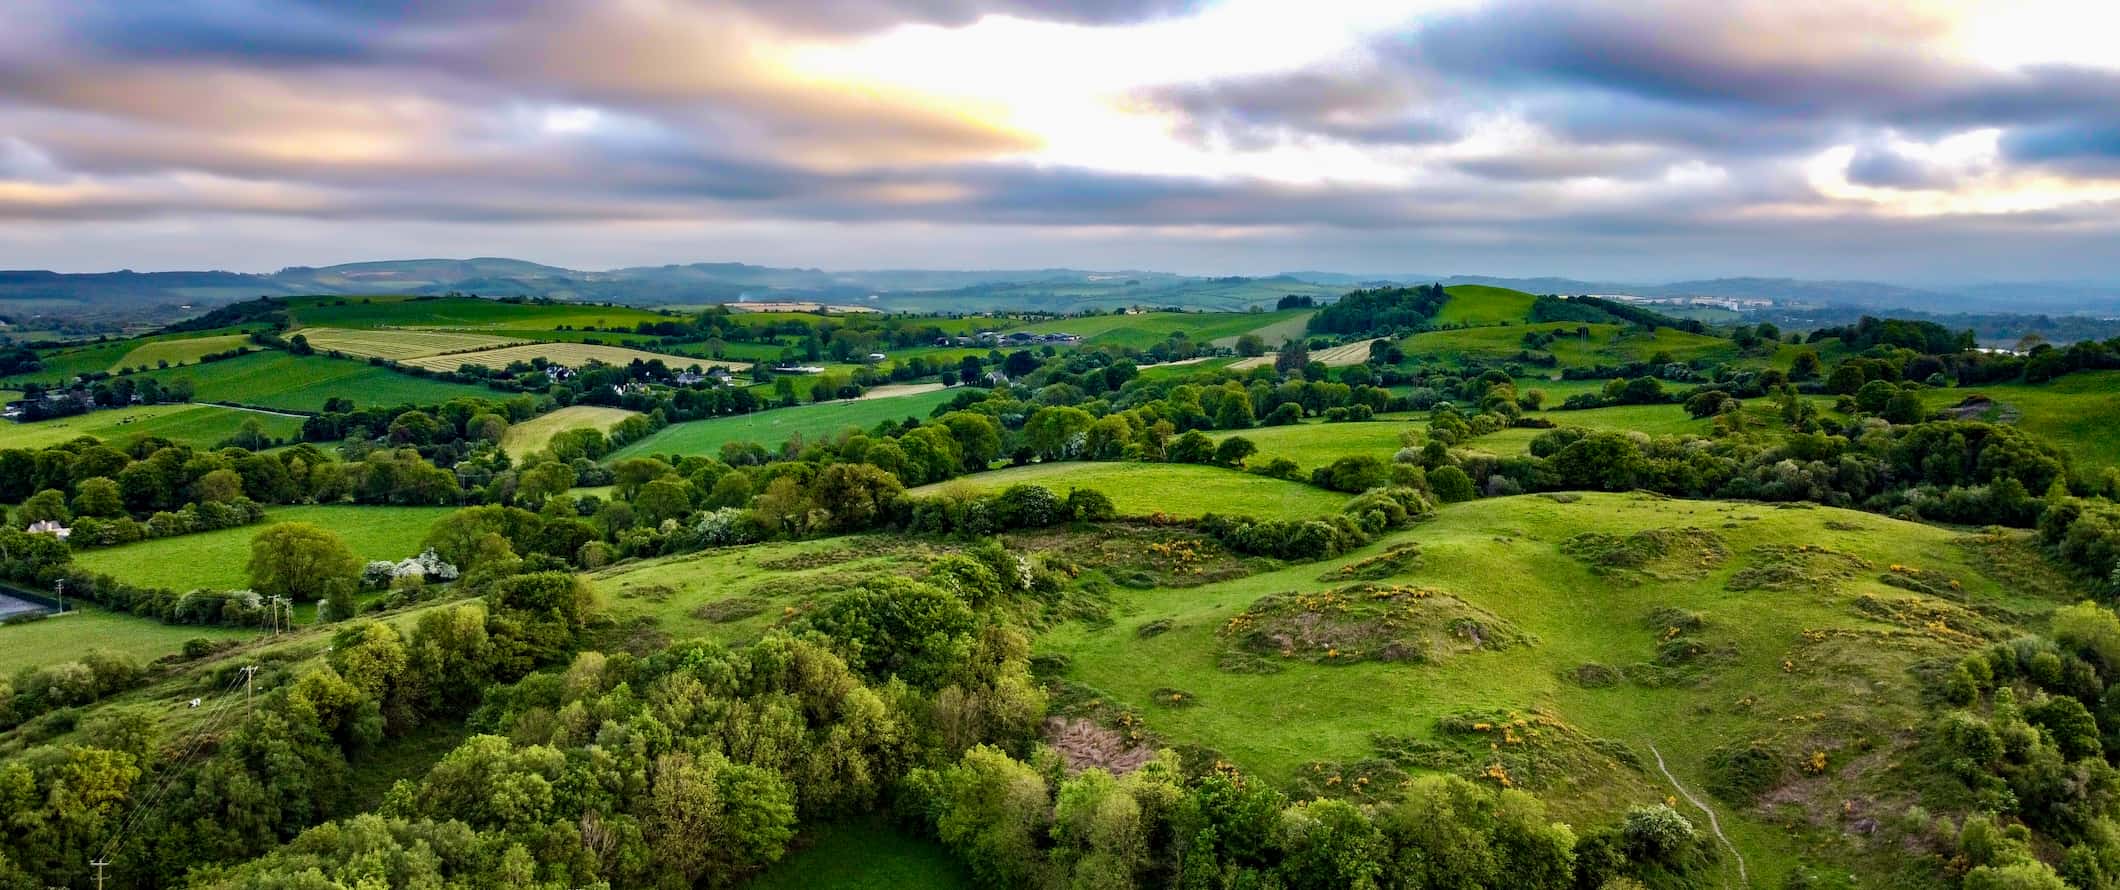 The lush, sprawling landscapes of County Cork, Ireland